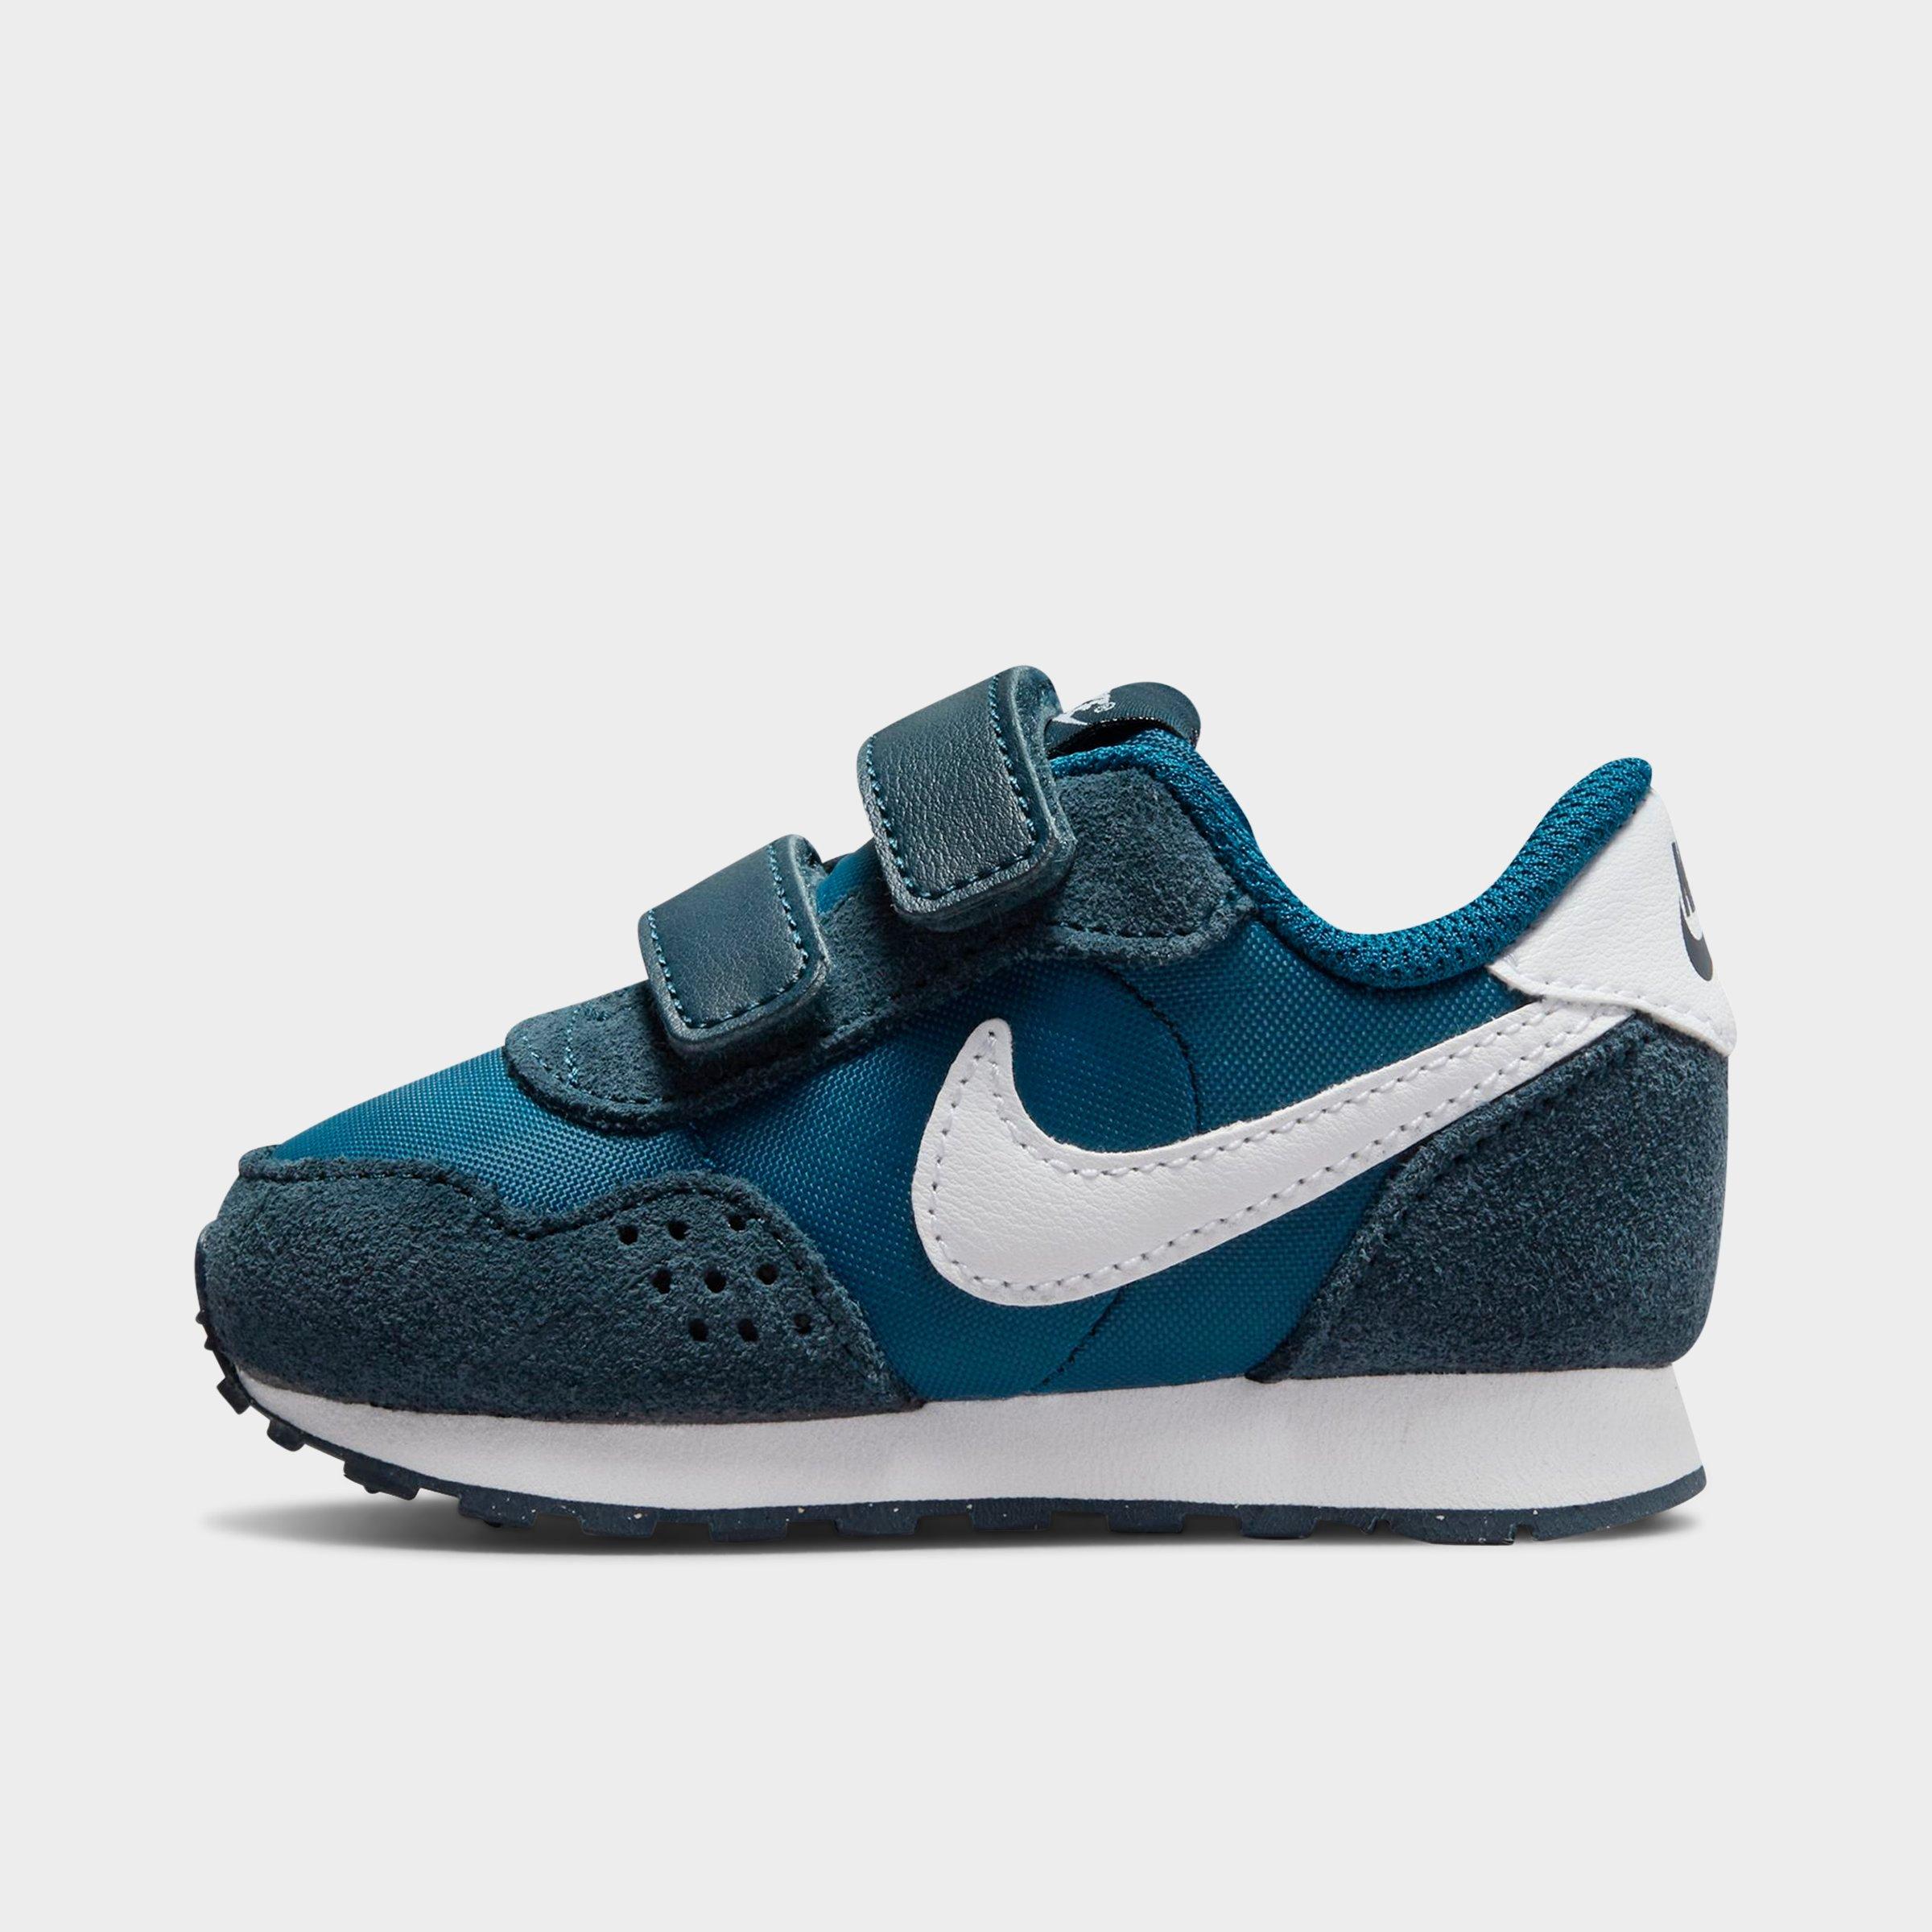 Nike Babies'  Boys' Toddler Md Valiant Hook-and-loop Casual Shoes Size 6.0 Suede In Marina/armory Navy/white